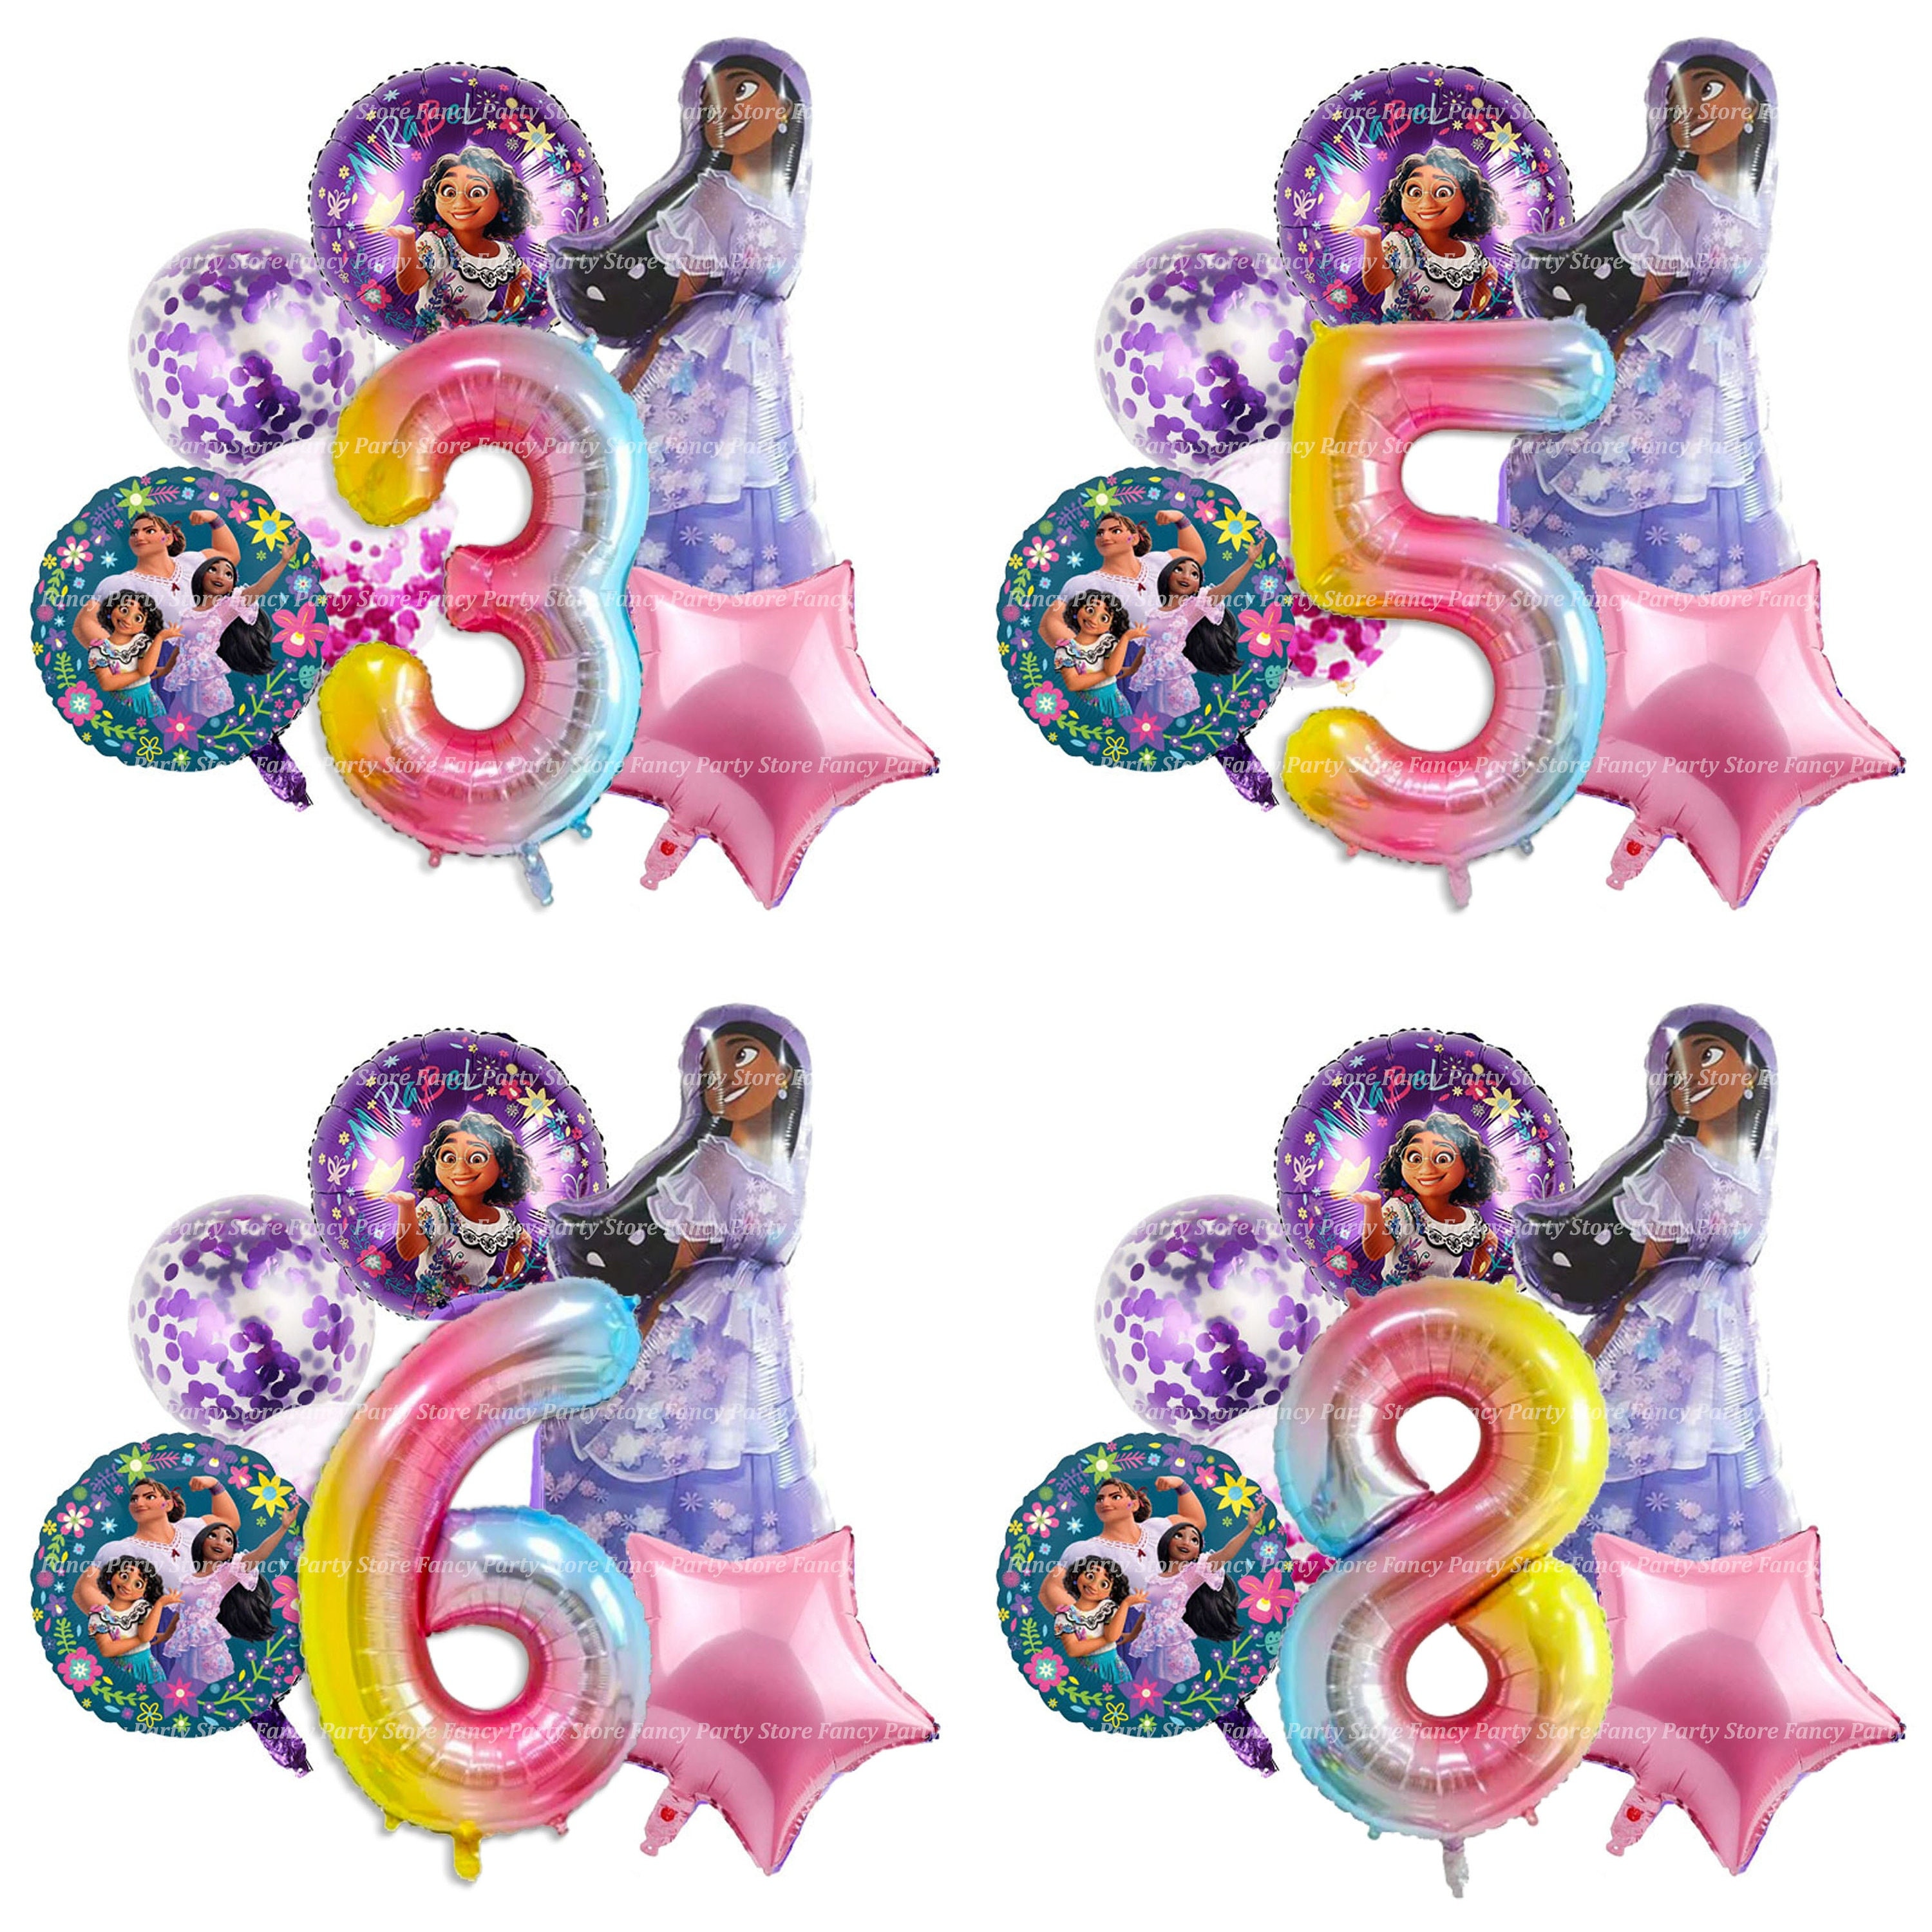  Encanto Party Supplies, 6th Encanto Birthday Party Decorations,  Encanto Party Favors Foil Balloons Set for Kids : Toys & Games